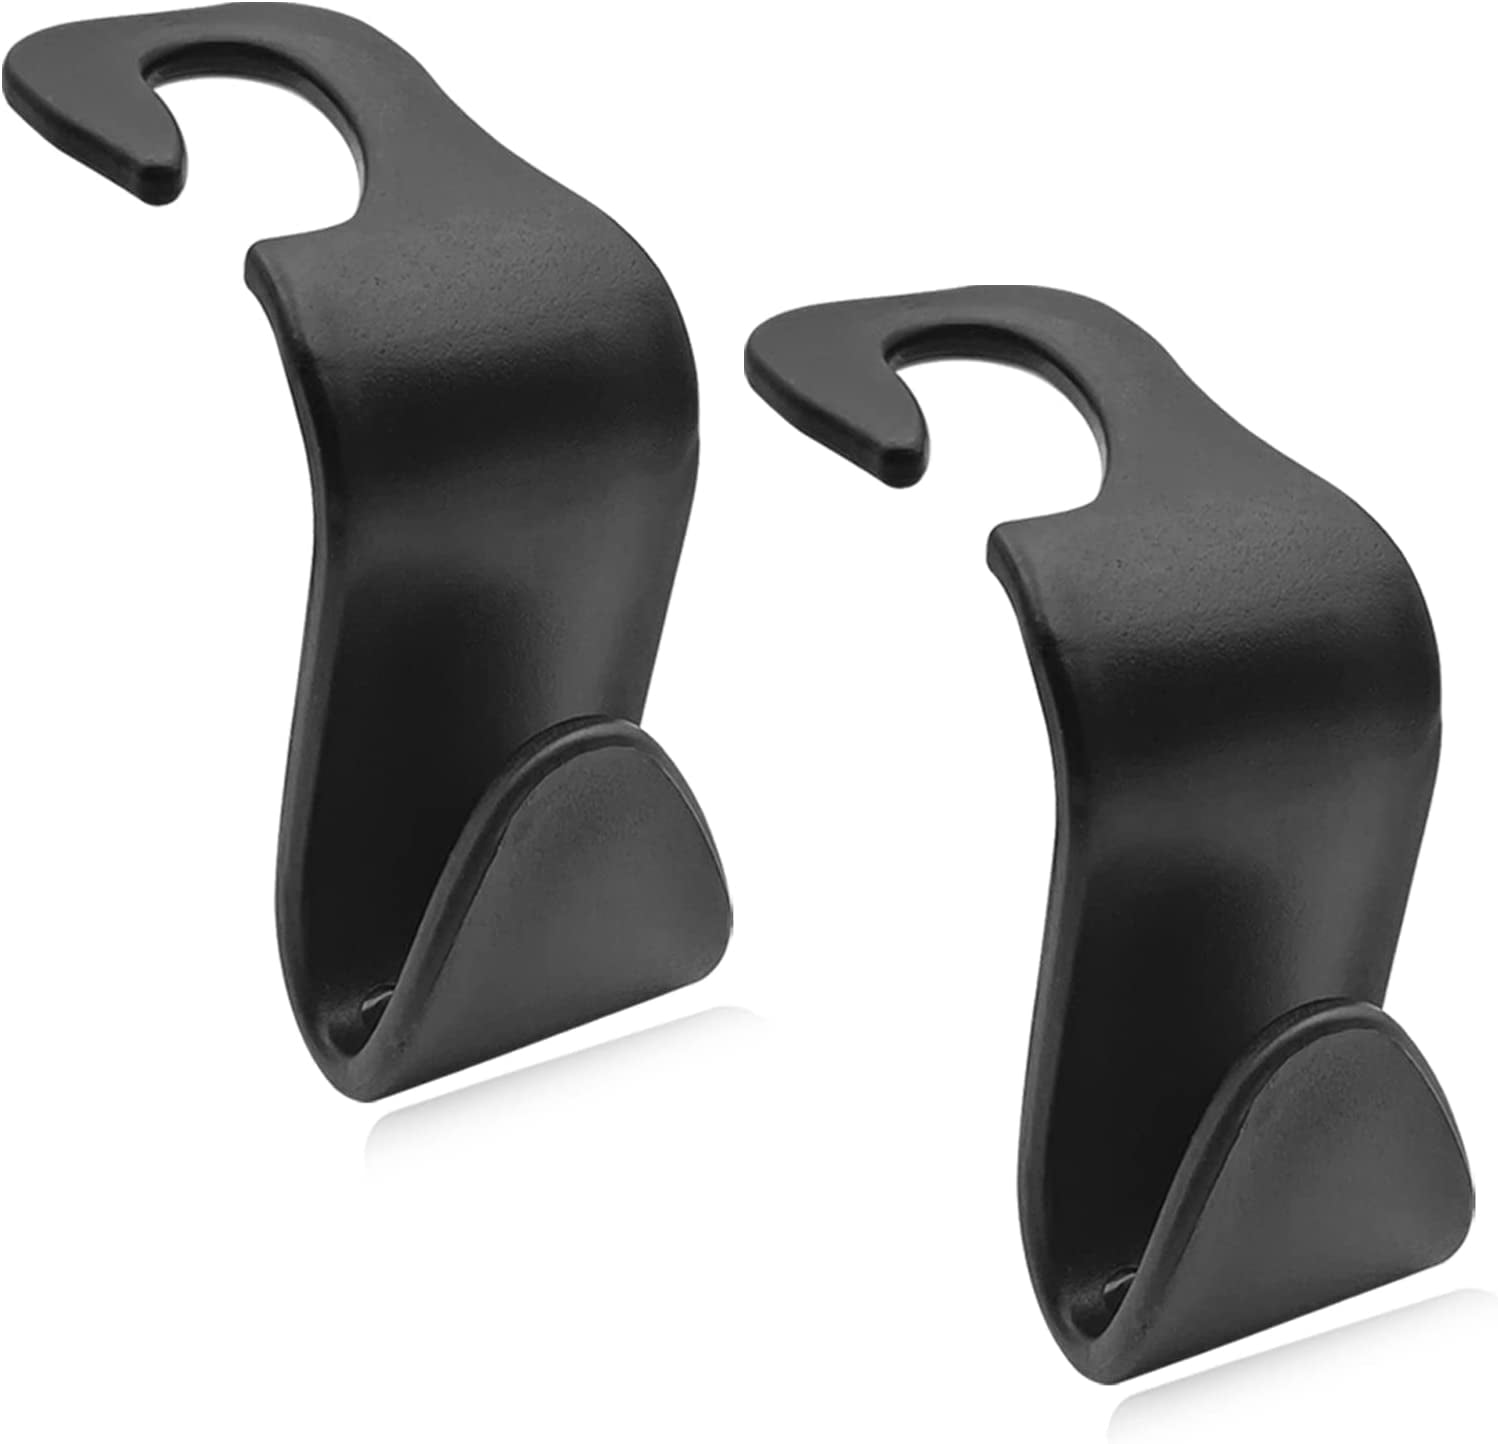 2PCS Car Seat Headrest Hooks, Universal Black Car Seat Hooks, Car Interior  Accessories, Can Hang Clothes, Umbrella, Backpack, Suitable for Most Cars 